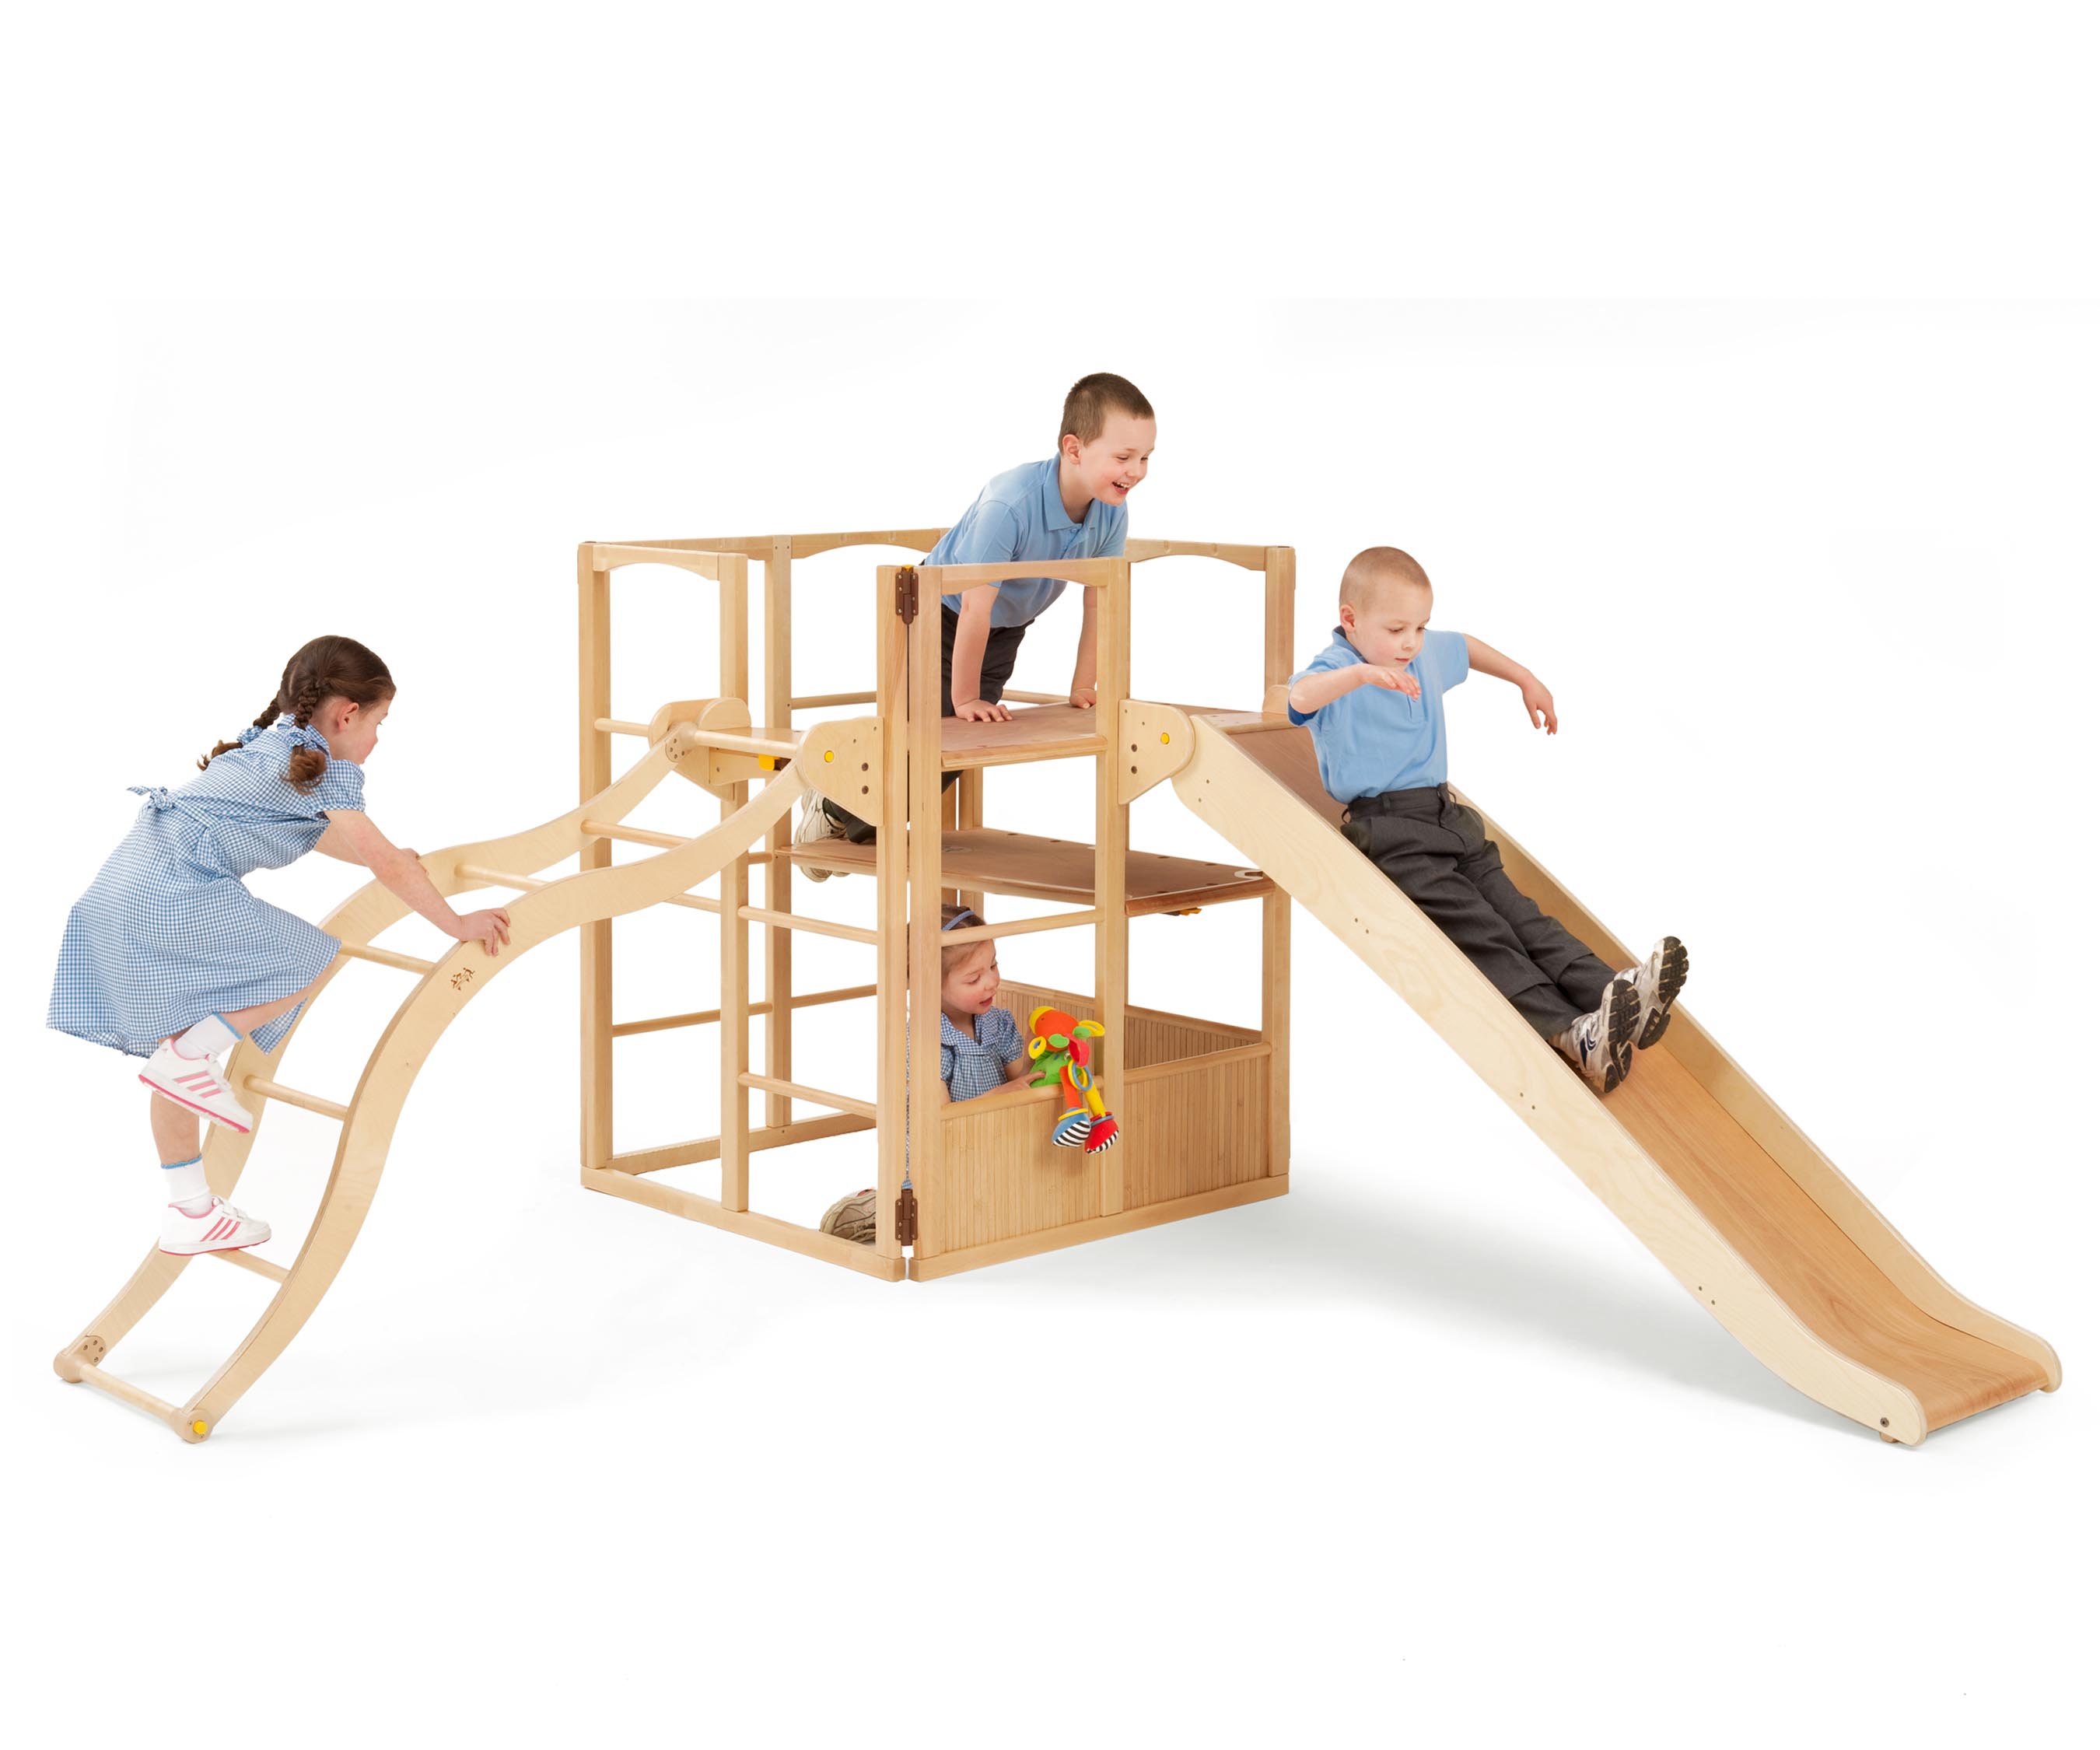 Playframe - Play Equipment For Cool Kids